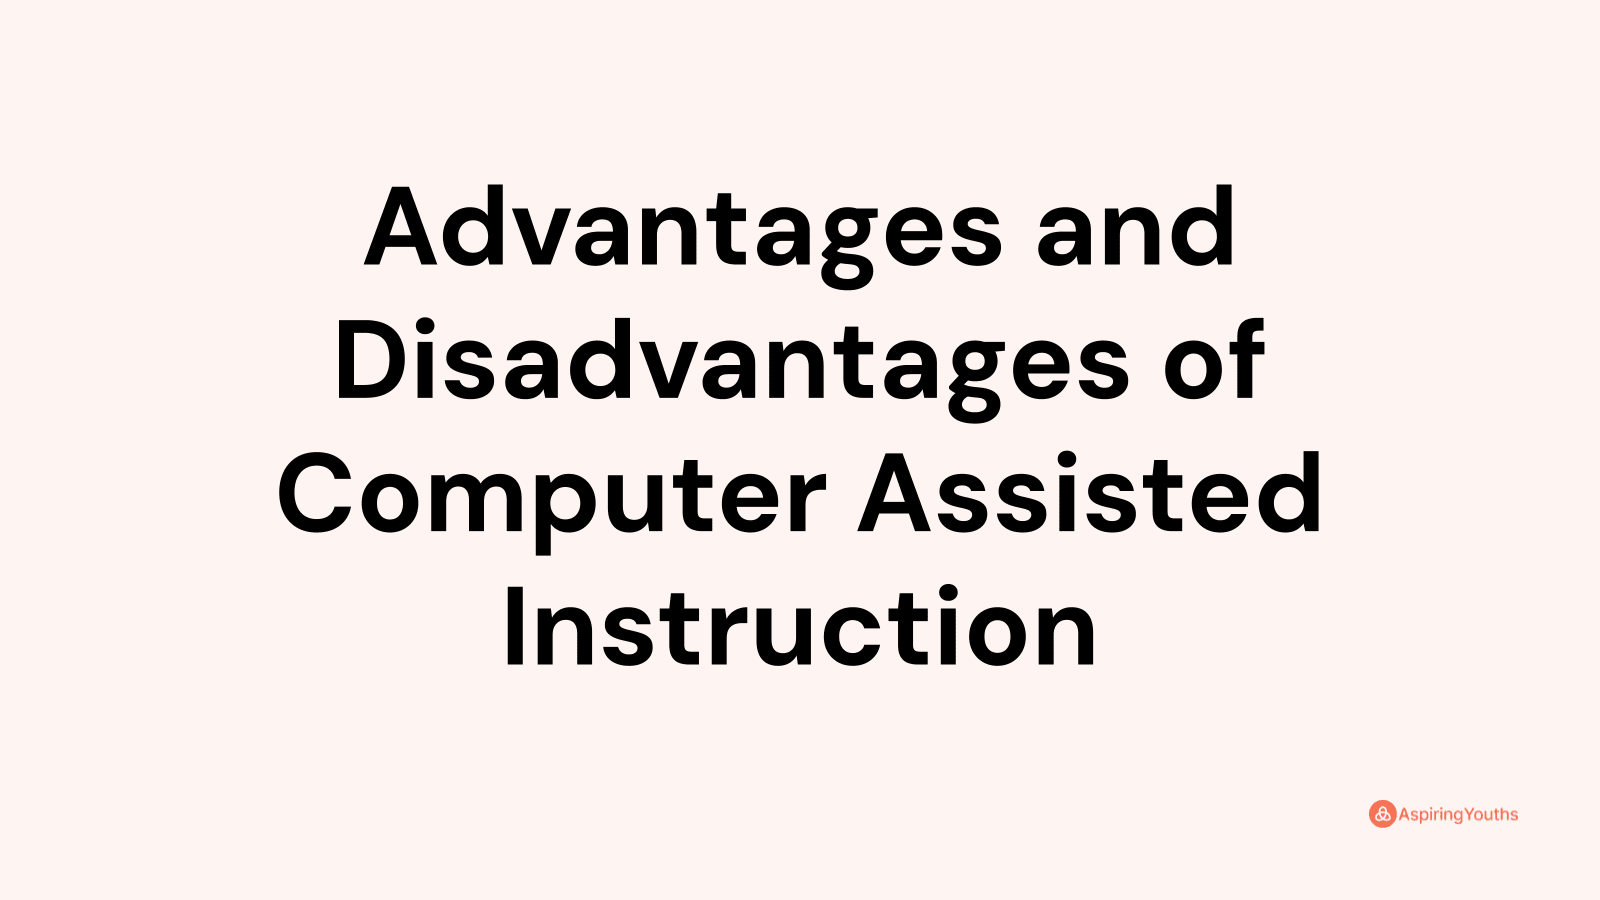 Advantages and disadvantages of Computer Assisted Instruction